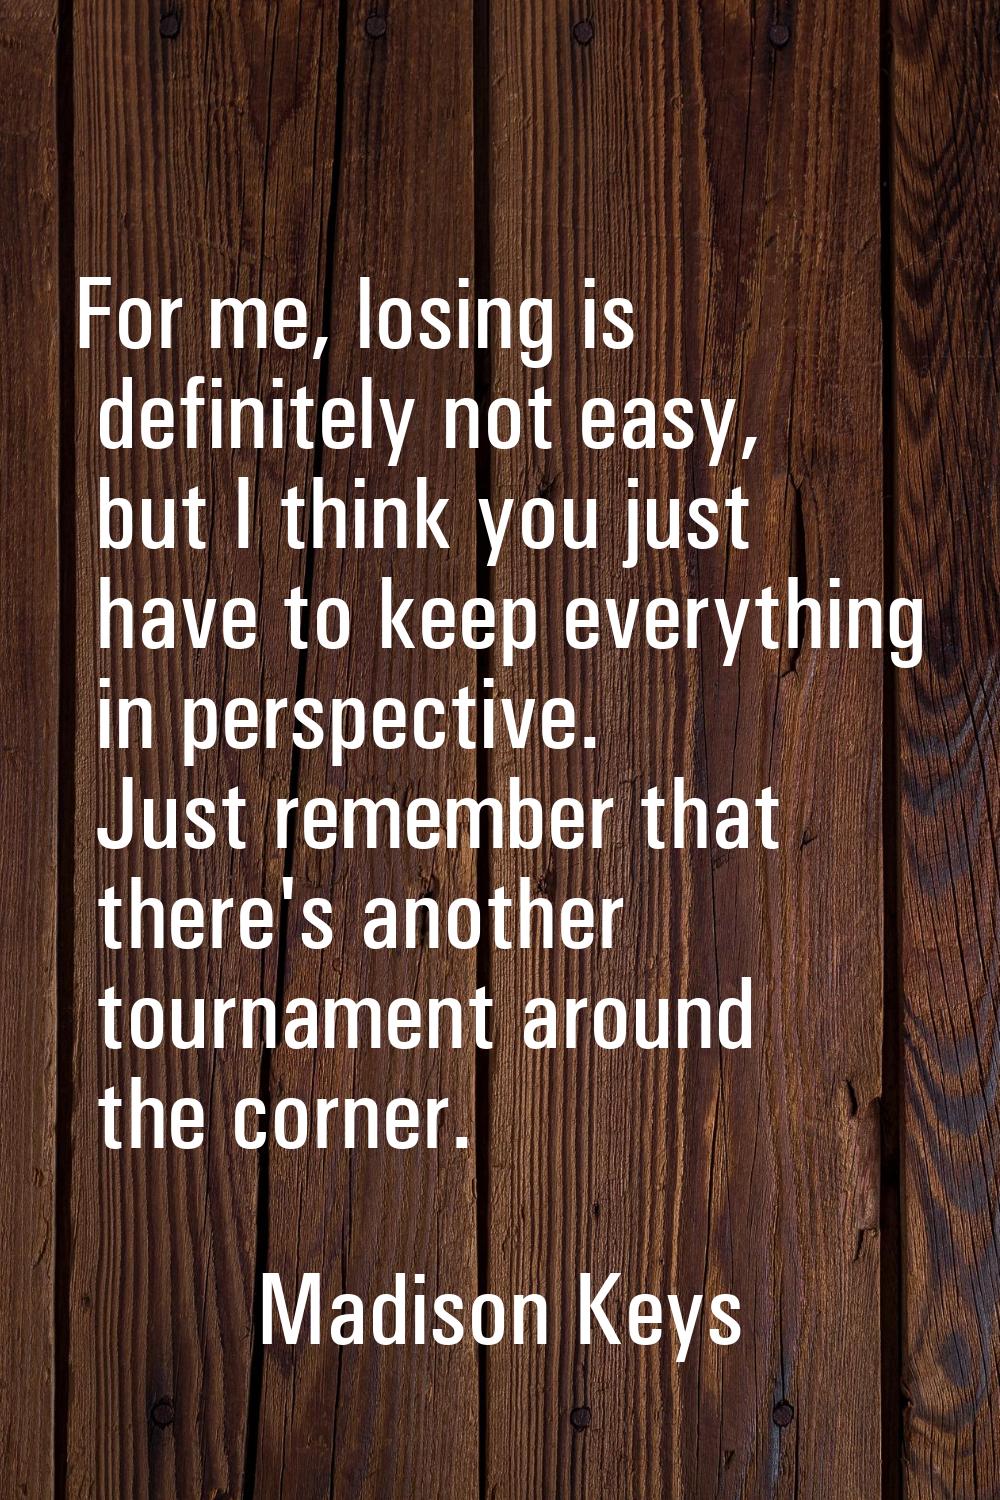 For me, losing is definitely not easy, but I think you just have to keep everything in perspective.